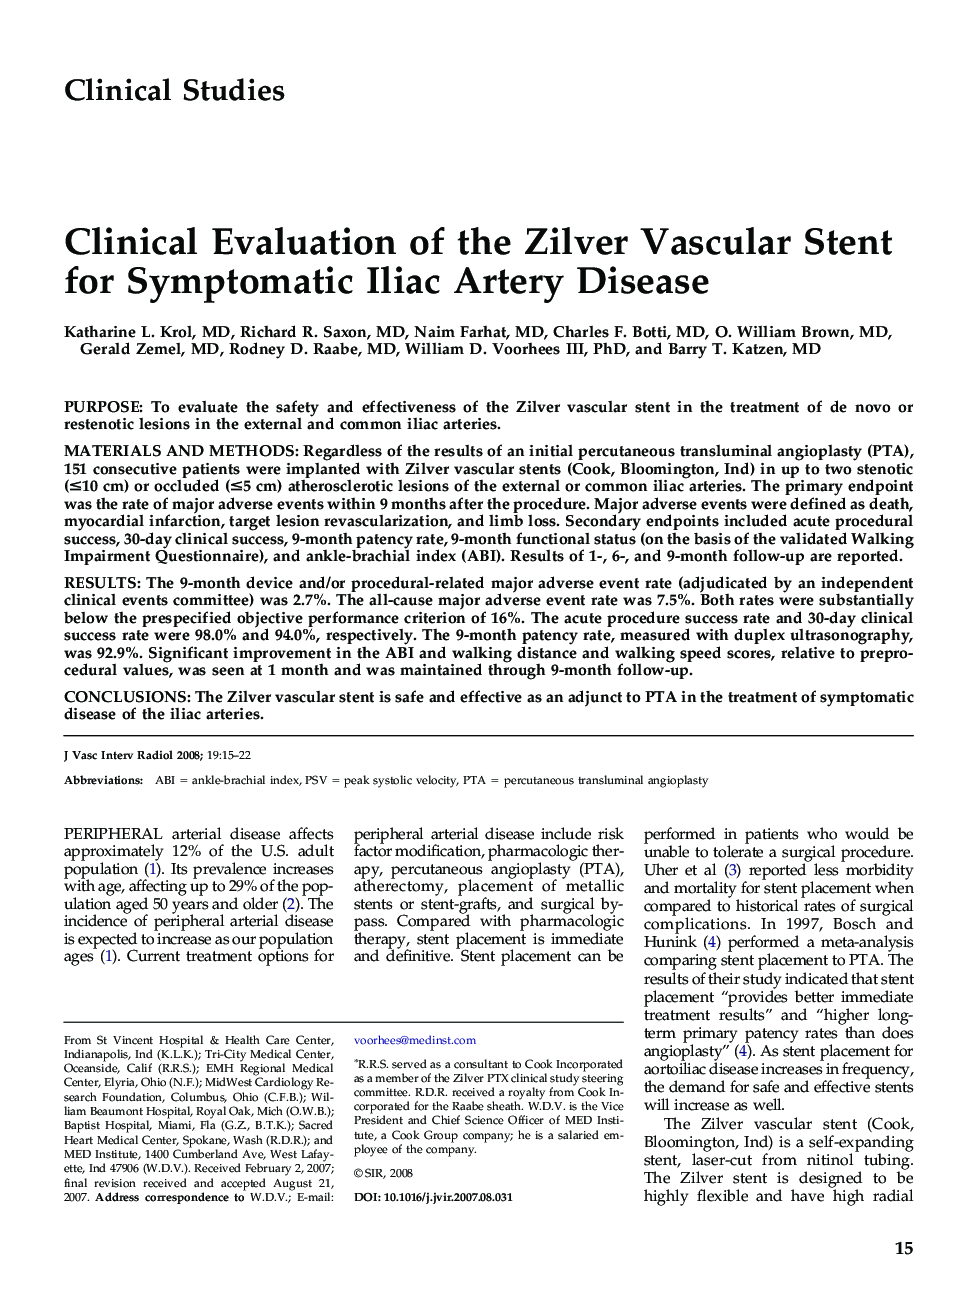 Clinical Evaluation of the Zilver Vascular Stent for Symptomatic Iliac Artery Disease